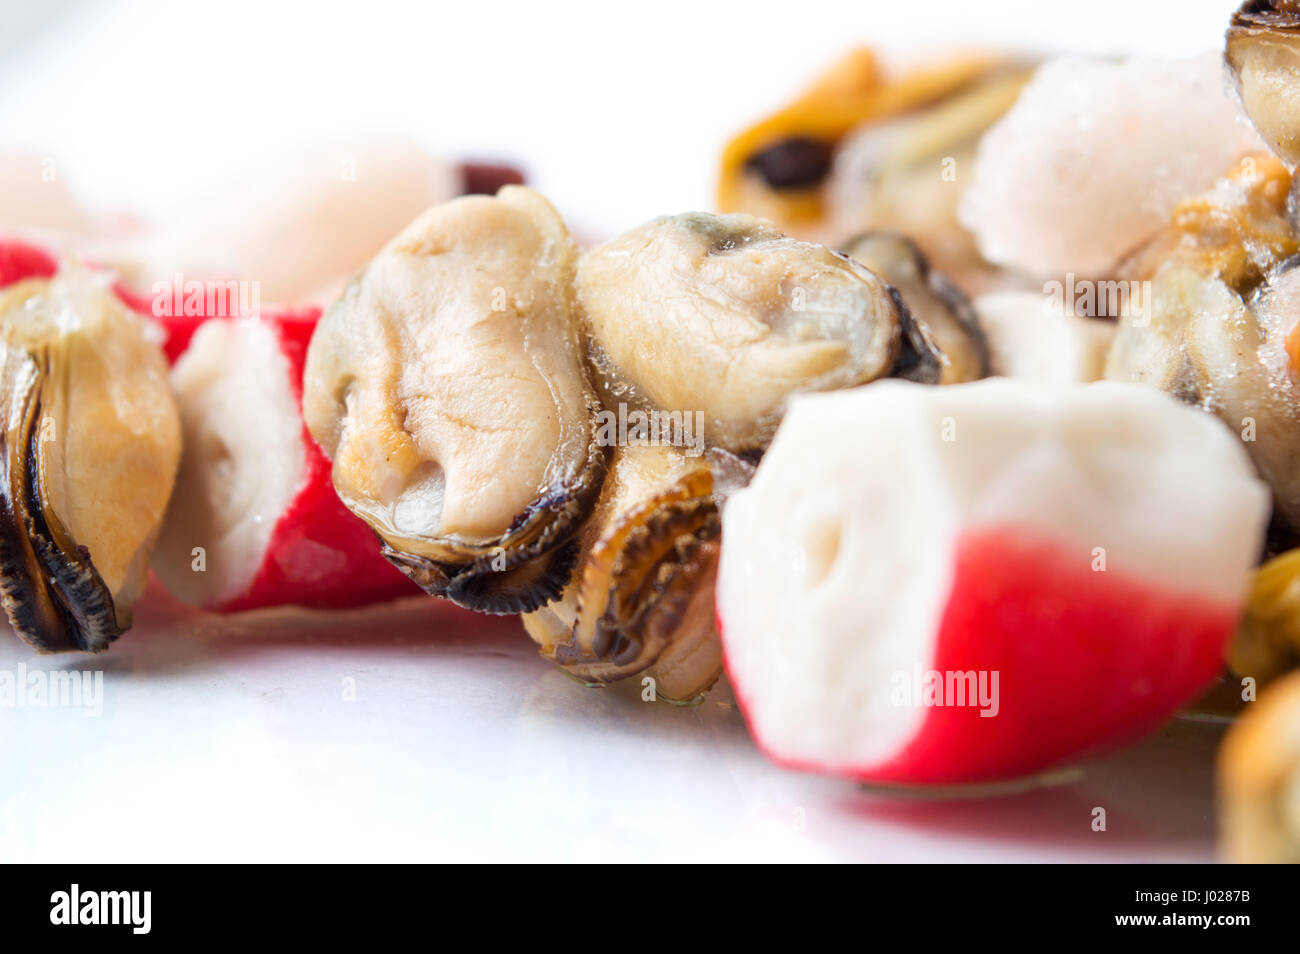 Frozen seafood mix of shrimps, surimi mussels and octopus Stock Photo